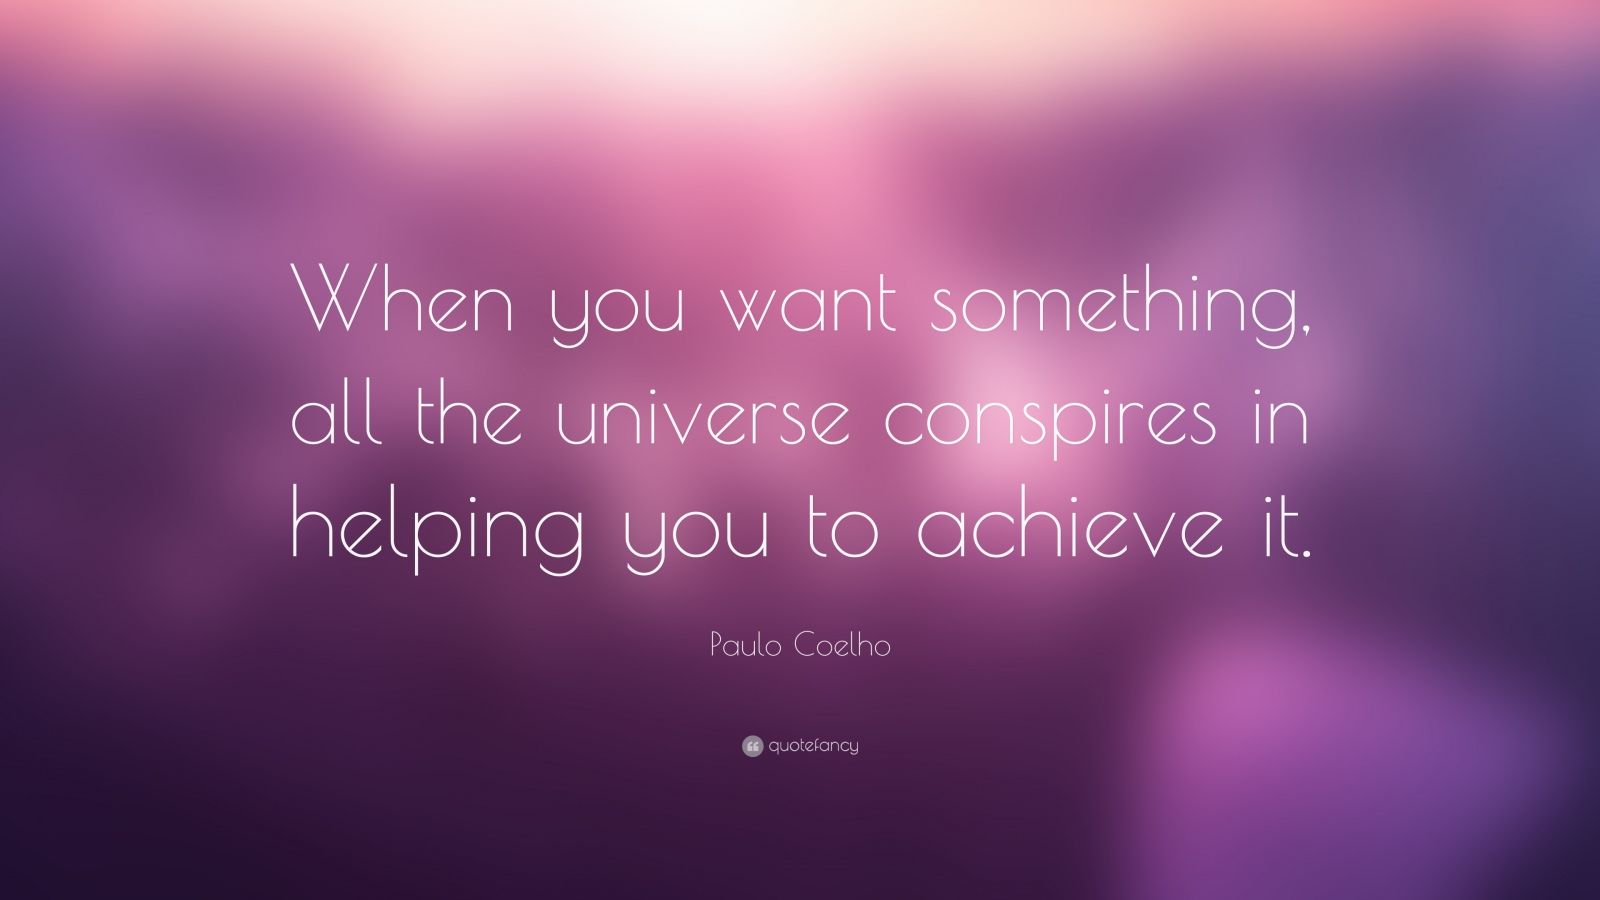 Paulo Coelho Quote: “When you want something, all the universe